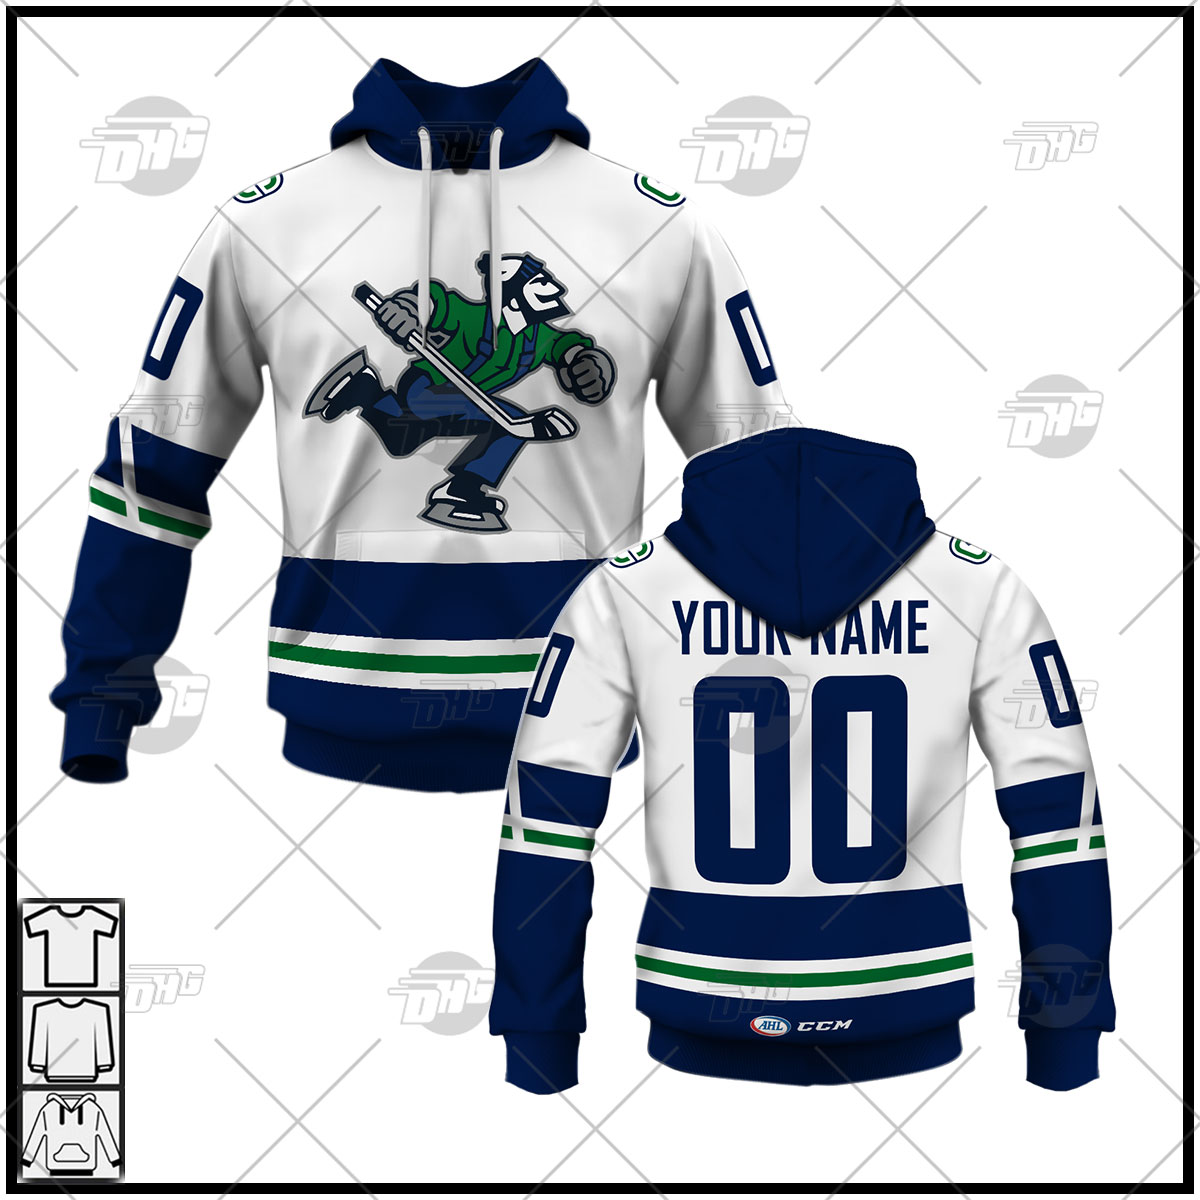 SALE] Personalized AHL Abbotsford Canucks Premier Jersey White